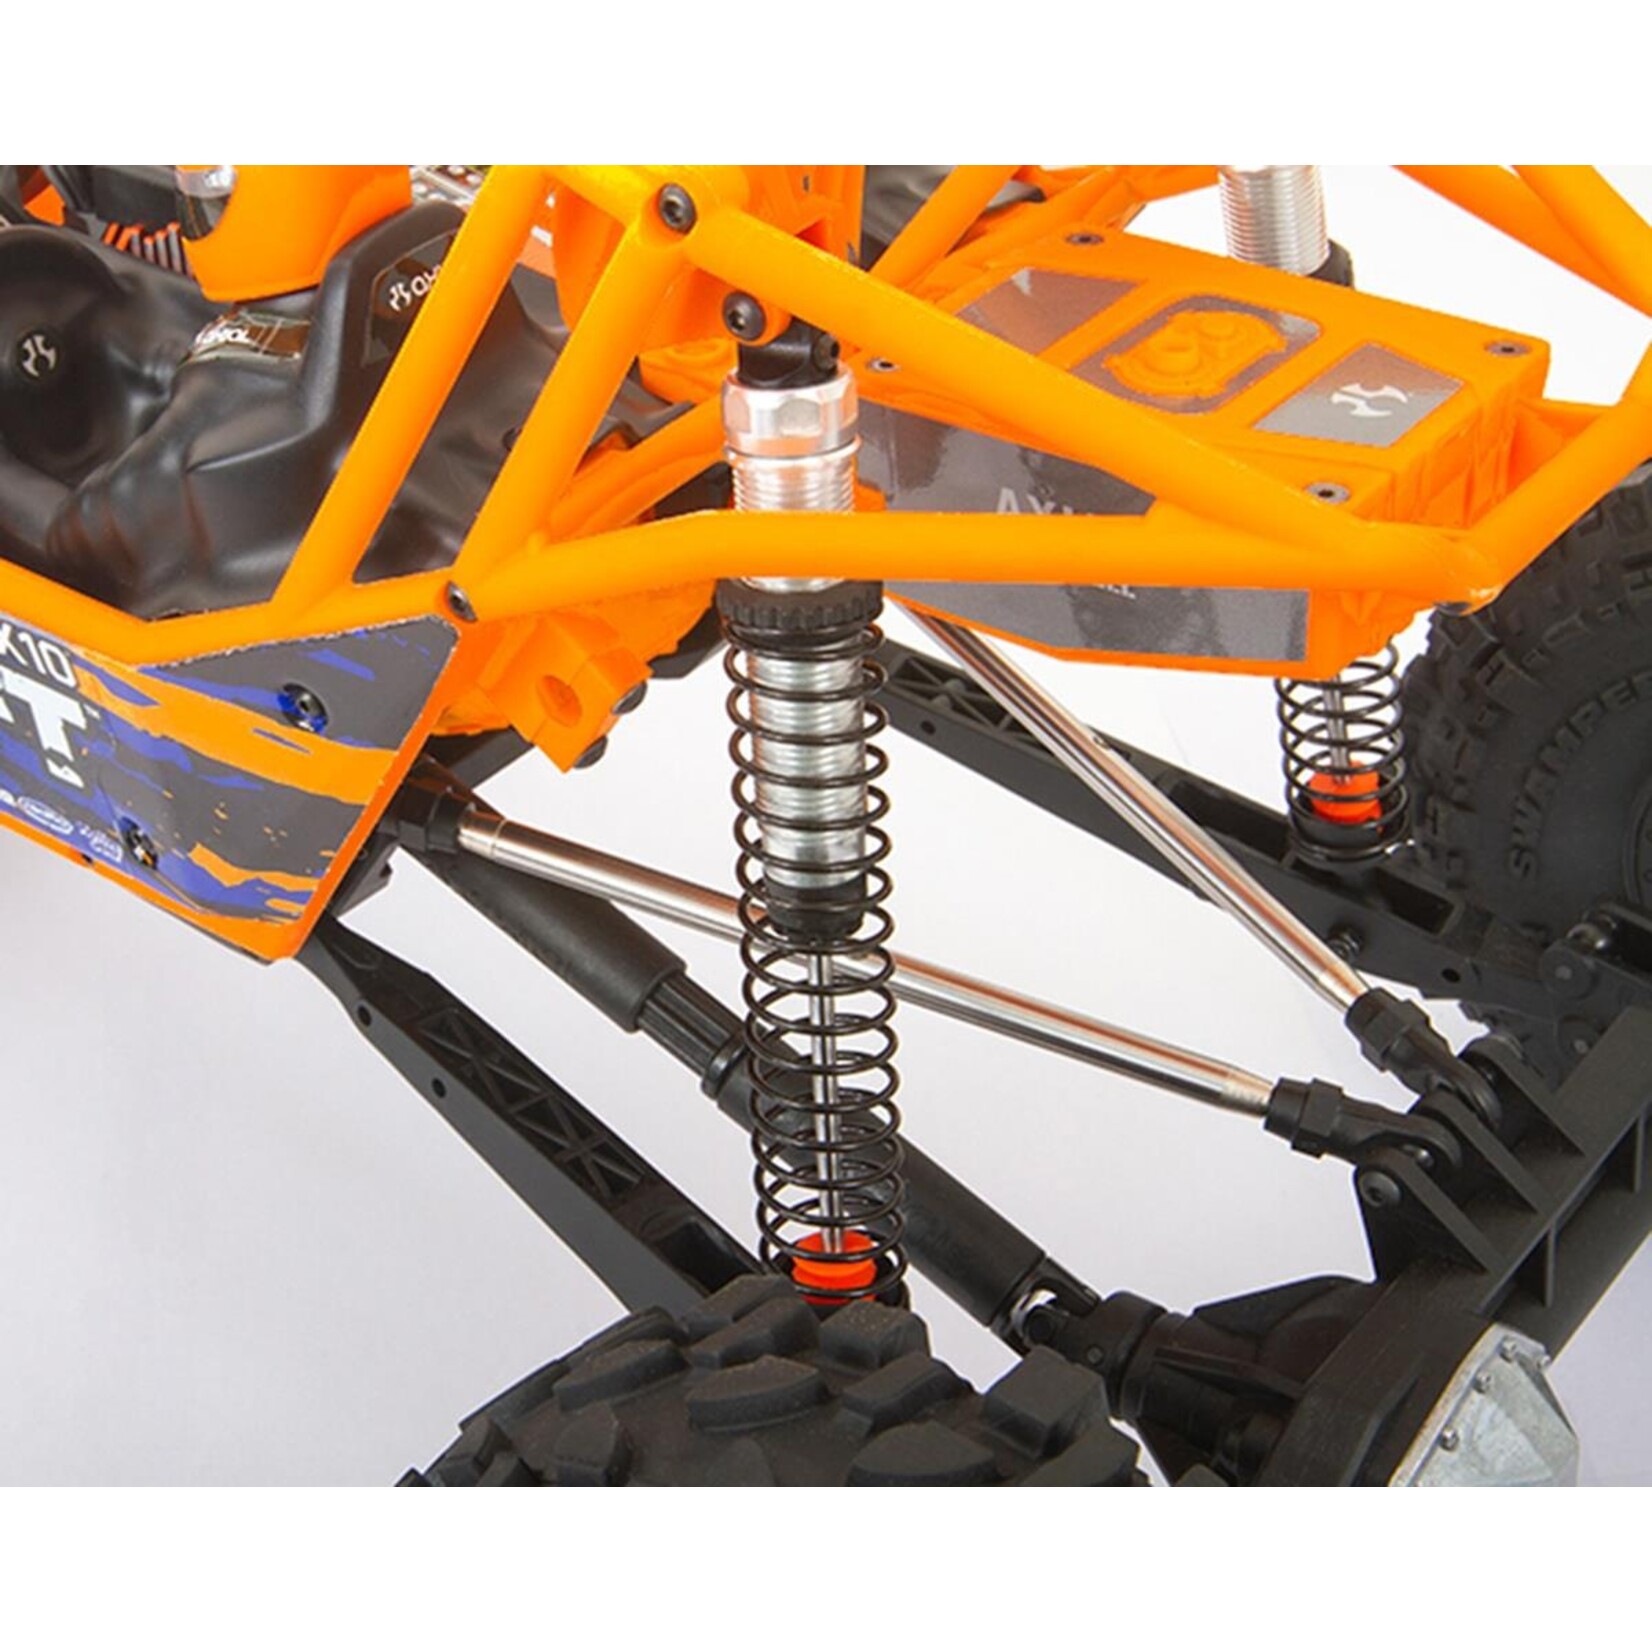 Axial Axial RBX10 Ryft 4WD 1/10 RTR Brushless Rock Bouncer (Orange) w/DX3 Radio #AXI03005T1